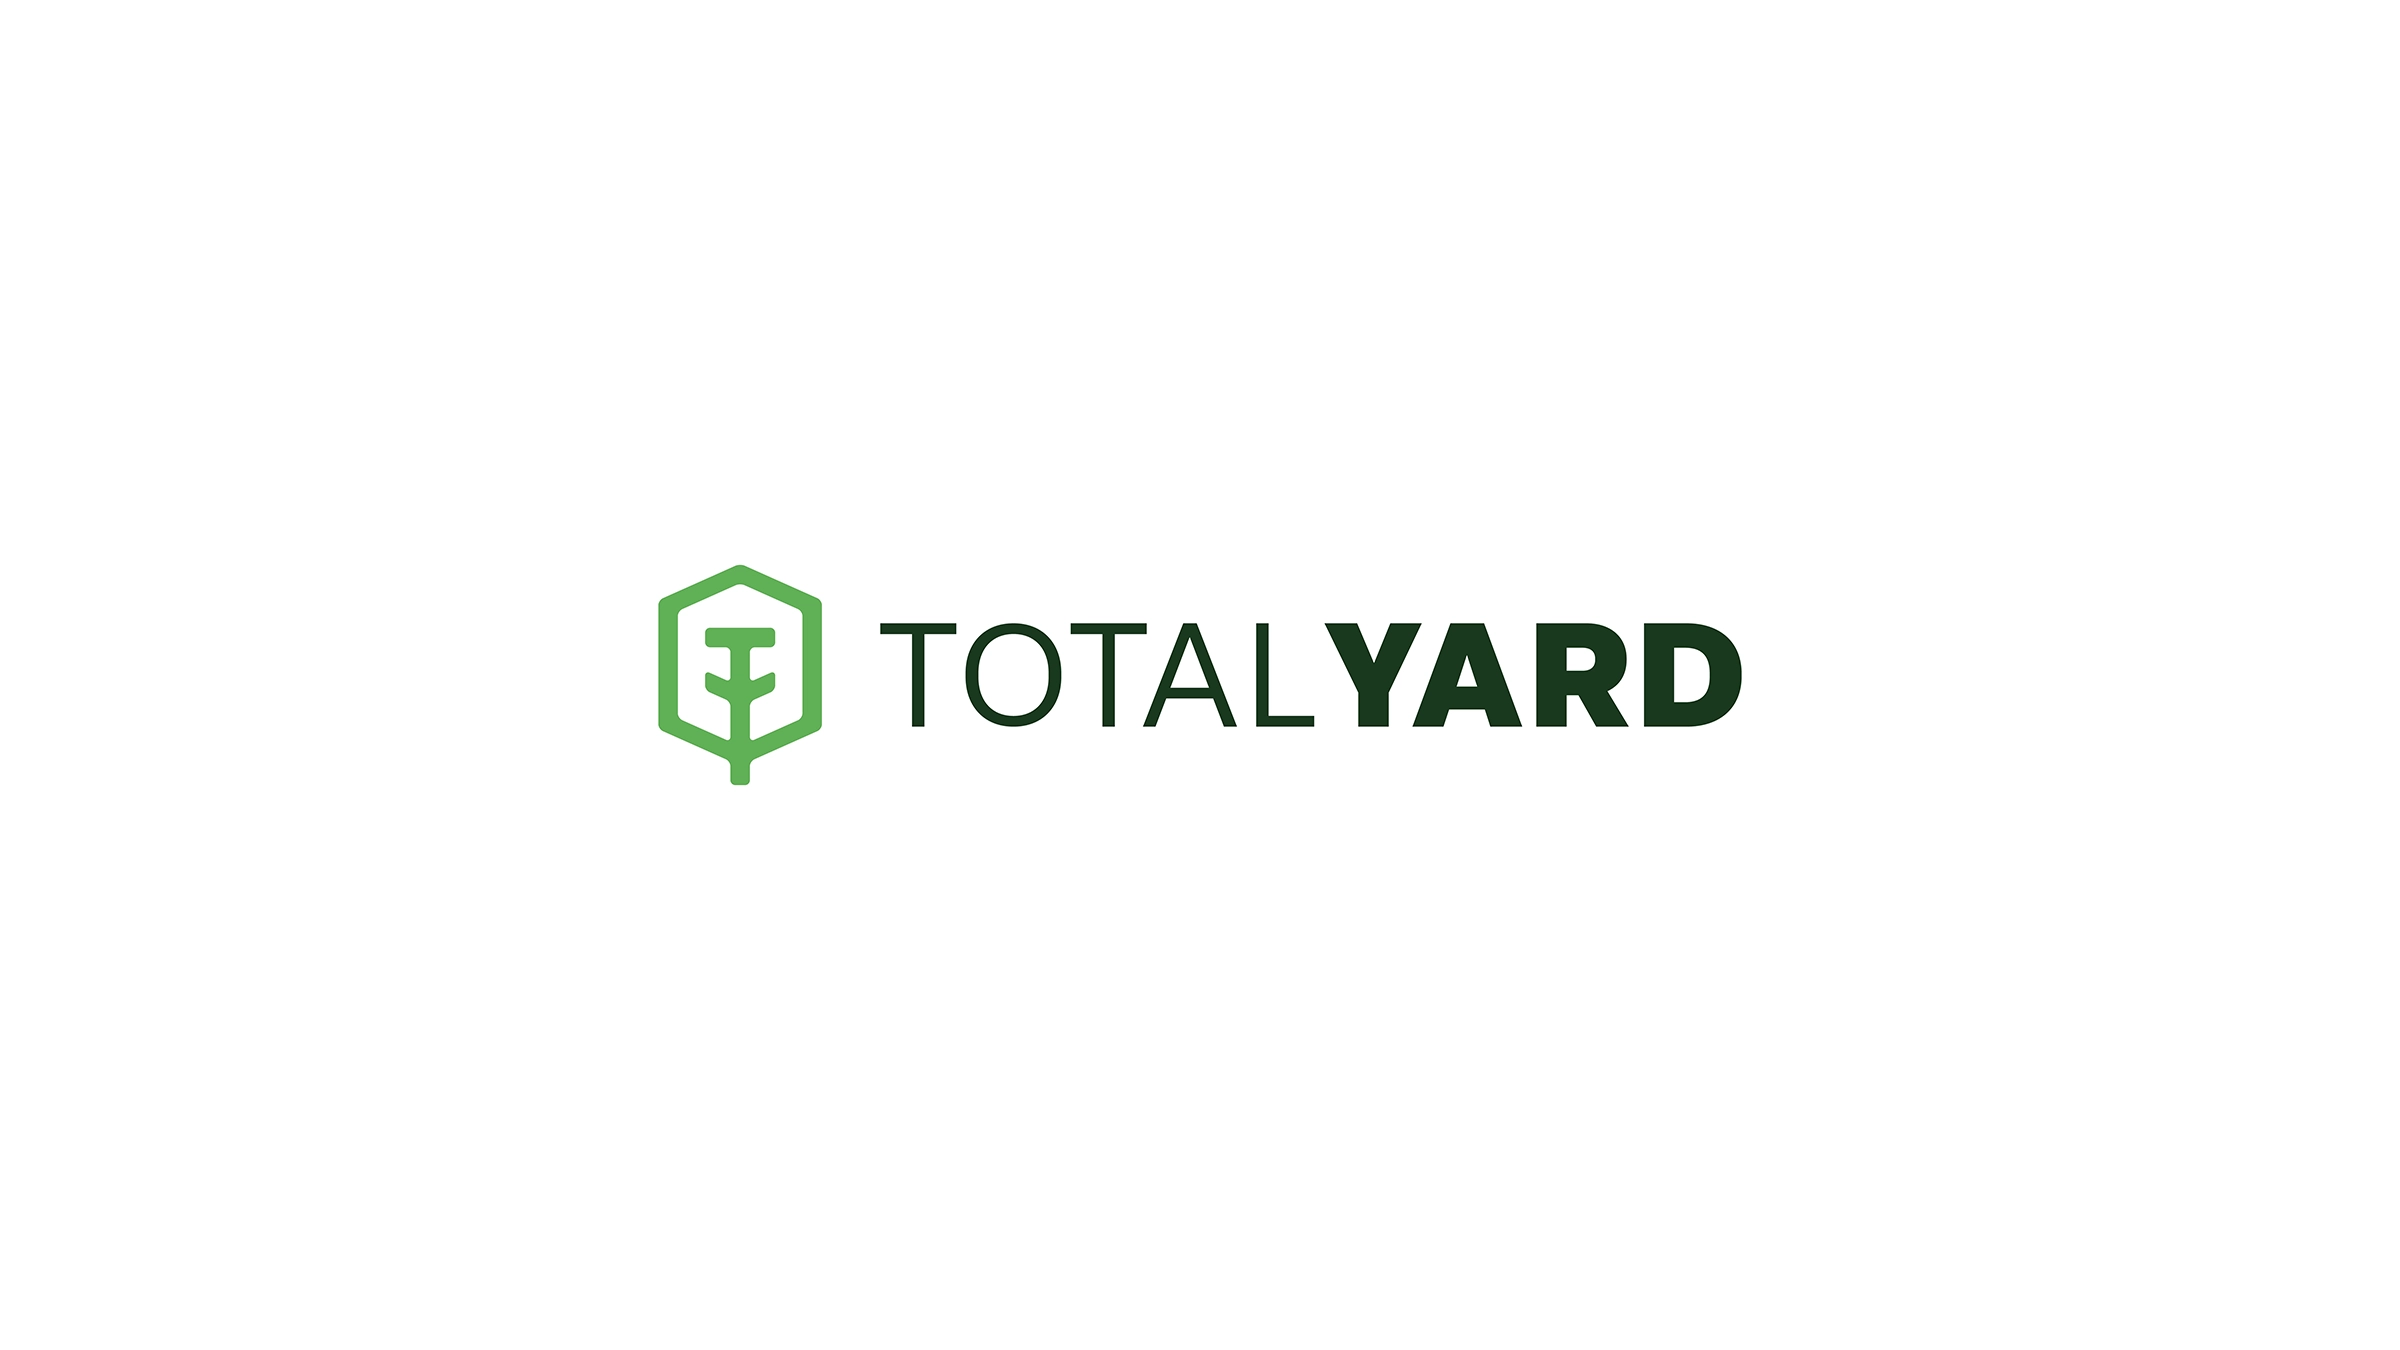 Total Yard's logo over a white background